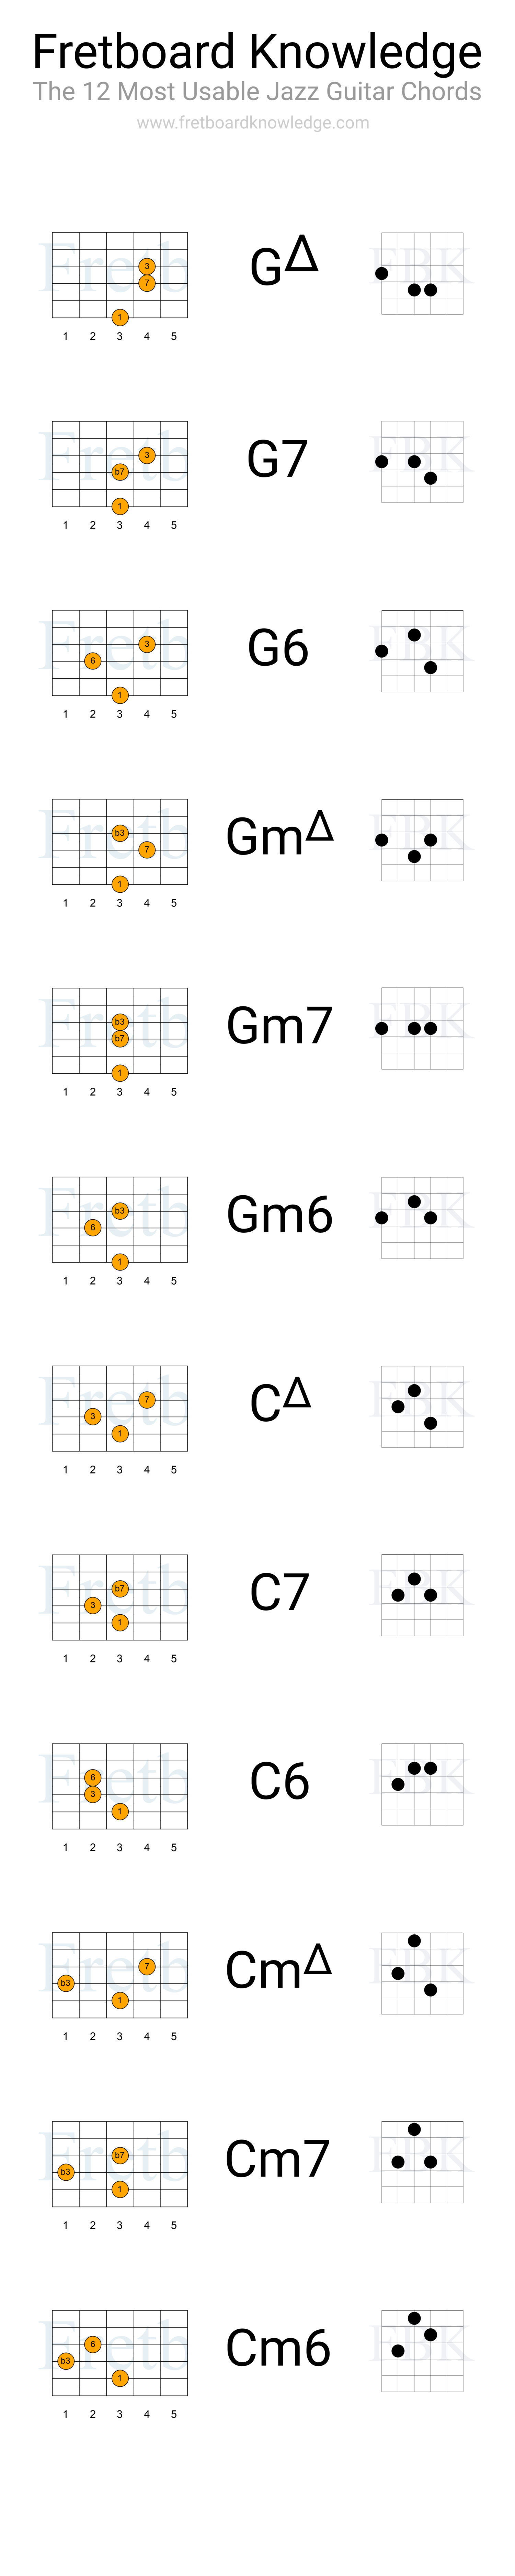 Fretboard Knowledge - 12 Most Common Jazz Chord Shapes